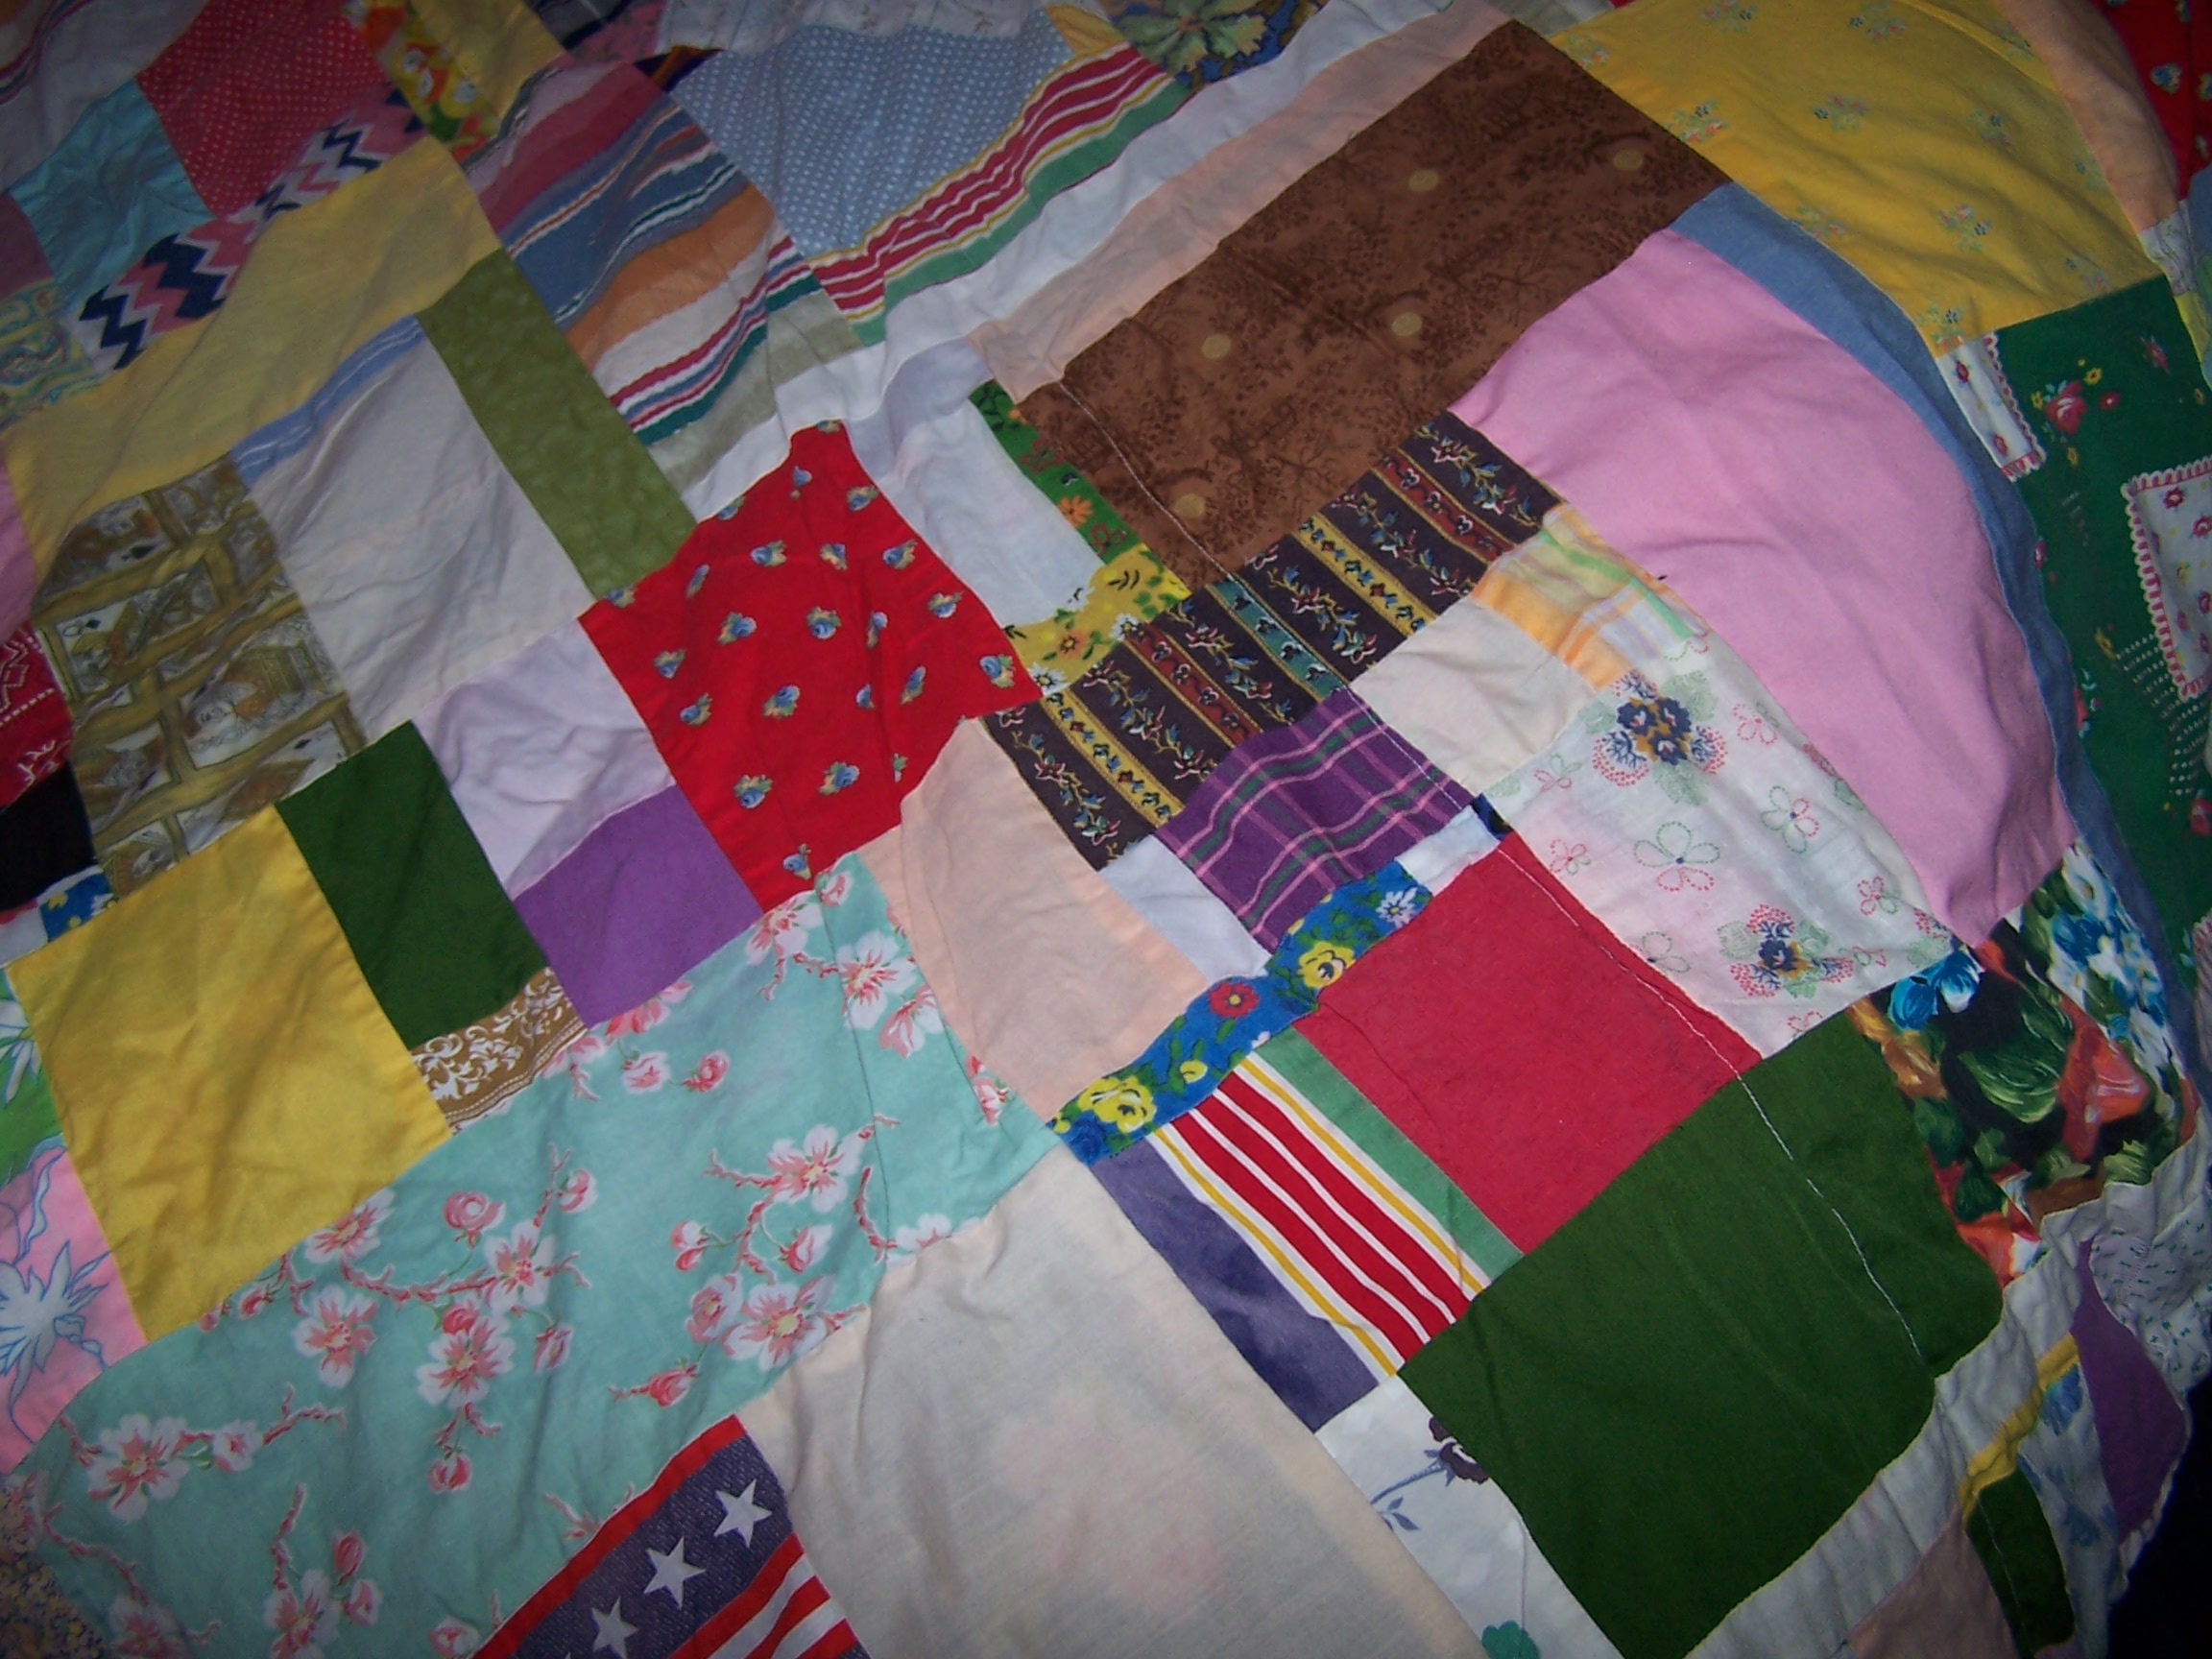 Image 5 of Patchwork Tablecloth, Round, 77 inches, Handmade, Vintage